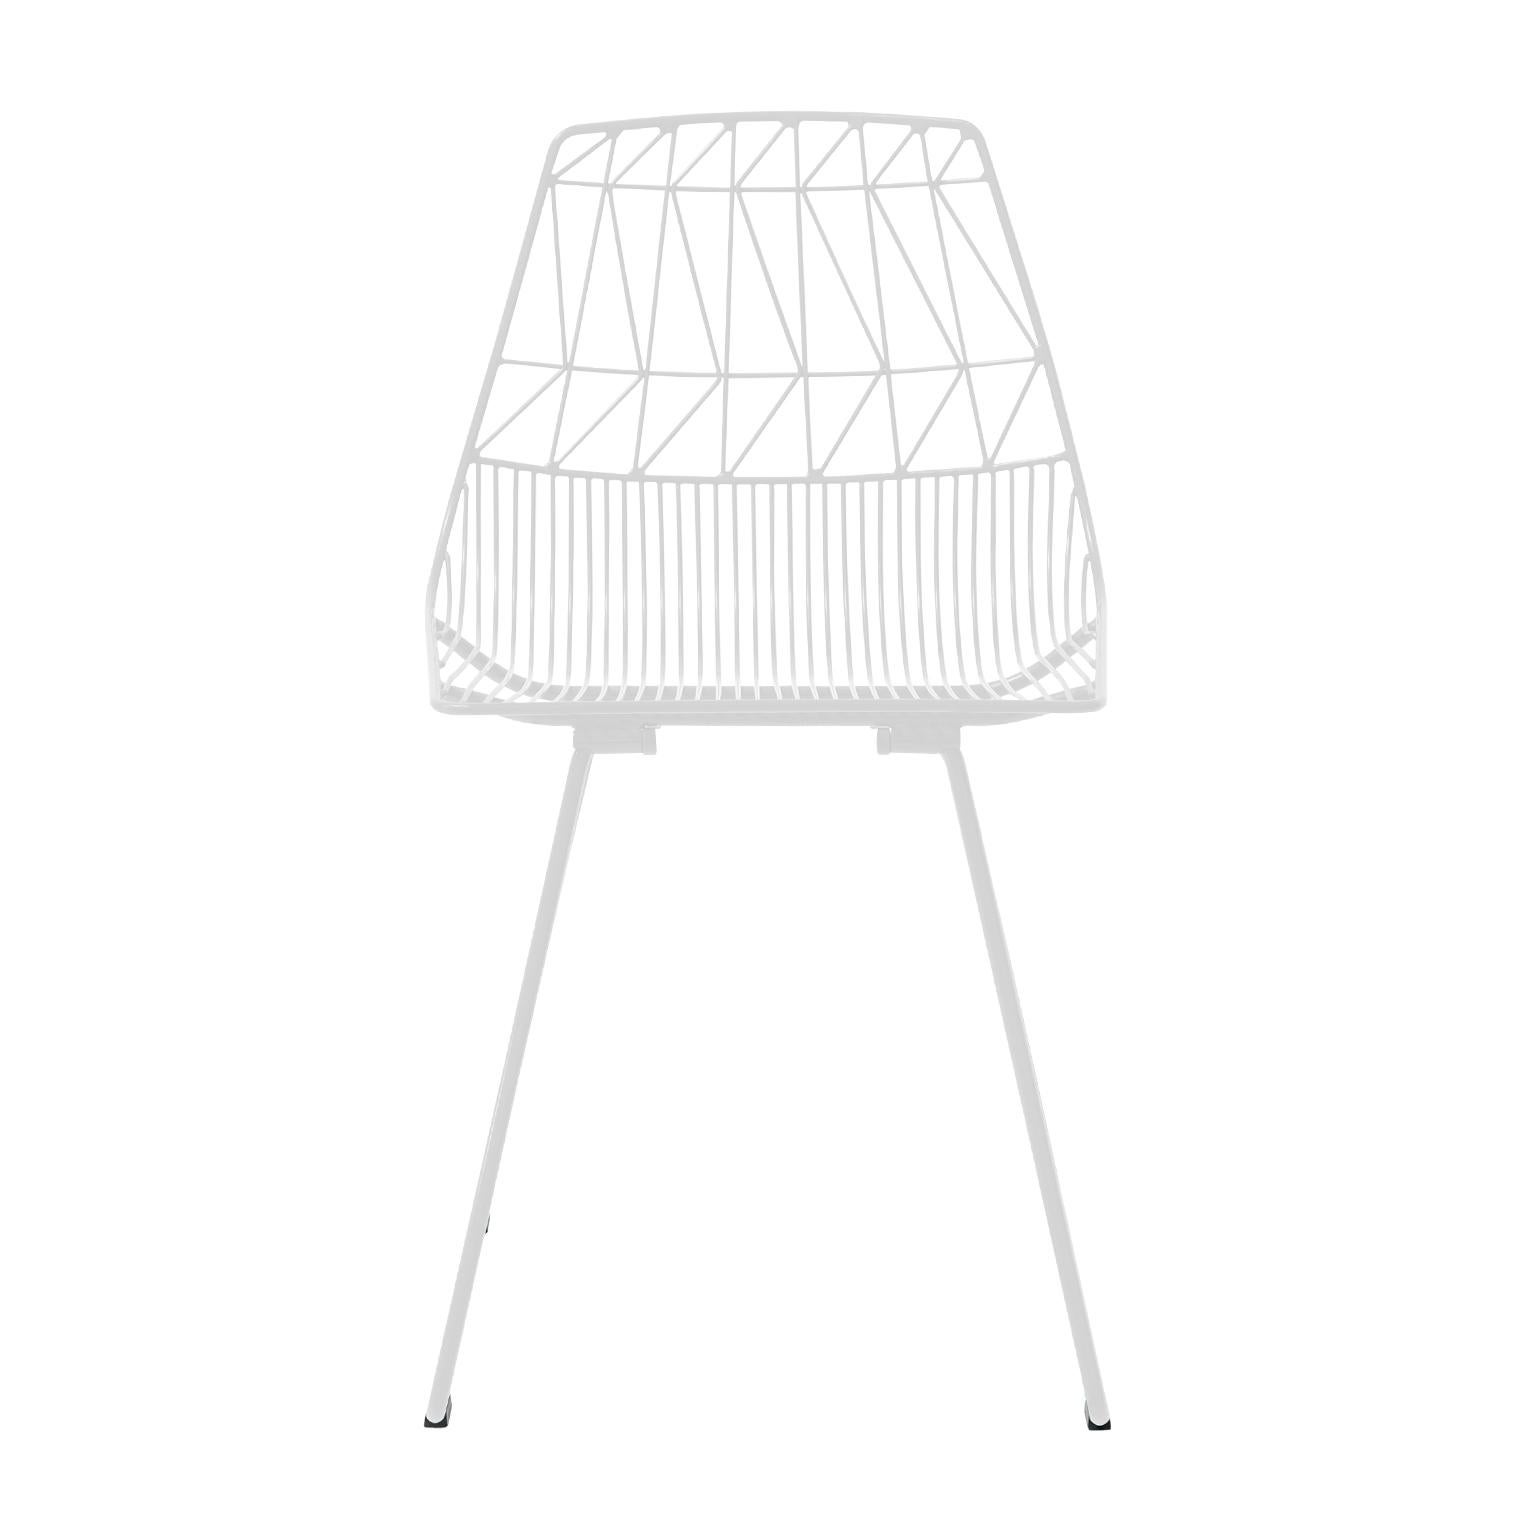 This new classic chair, inspired by midcentury designs has revolutionized the wire furniture industry with its sleek, edgy, and fresh design. The Lucy side chair is durable for commercial and residential projects, and it is designed for both indoors